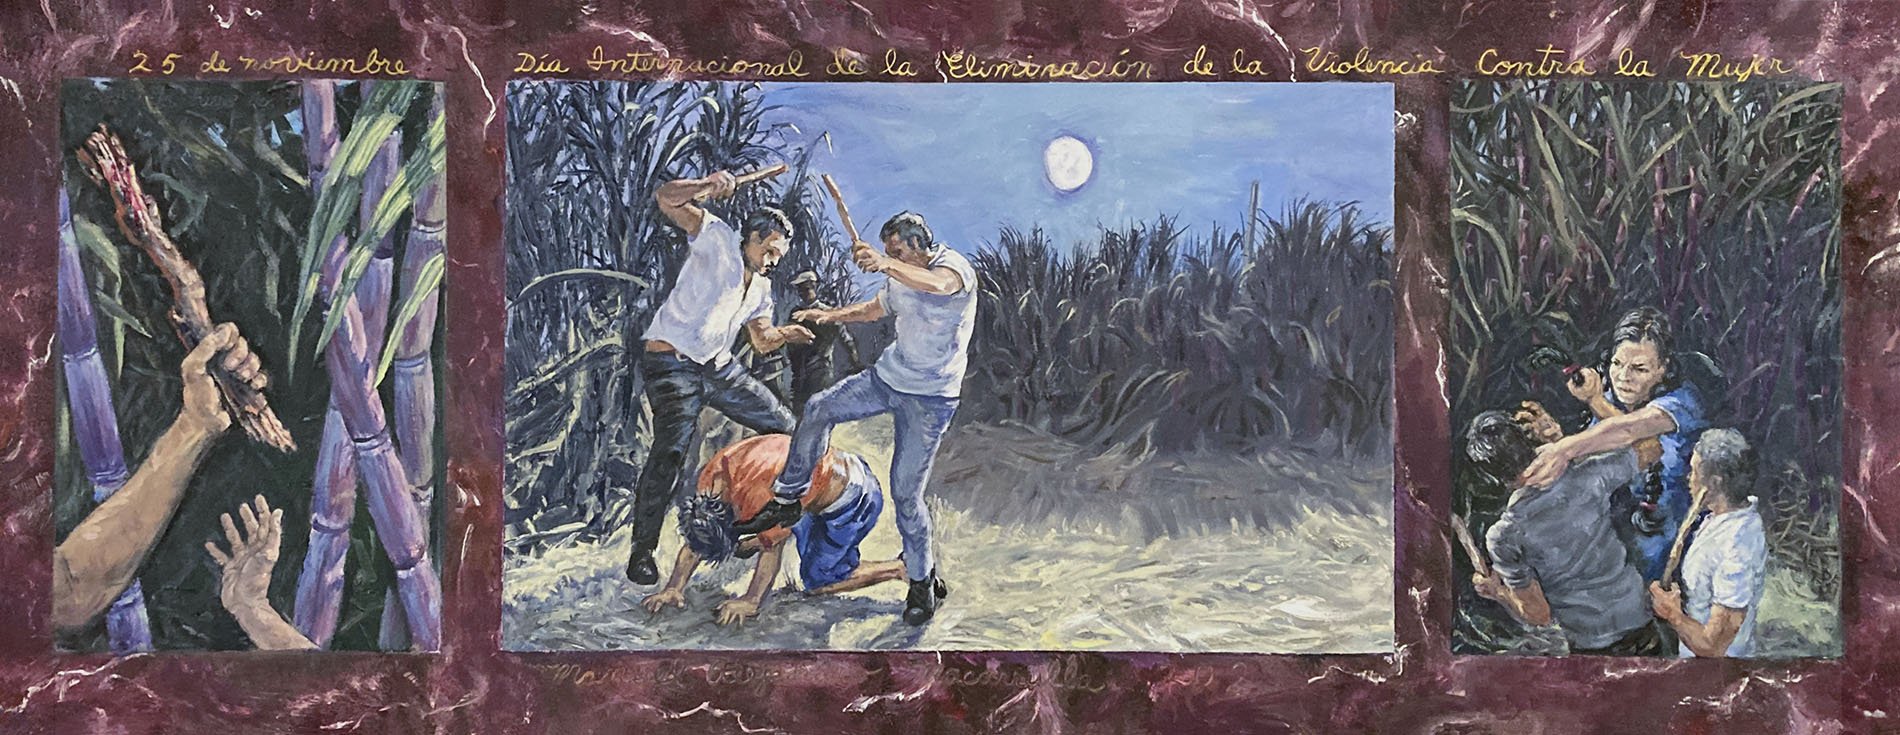    Goat Song (Canto de chivo) #7: November 25th: International Day to End Violence Against Women   (triptych), 2021. Oil on Canvas. 26” X 66”.  This triptych tells the story of the assassination of the three Mirabal sisters, Patria, Minerva, and Marí